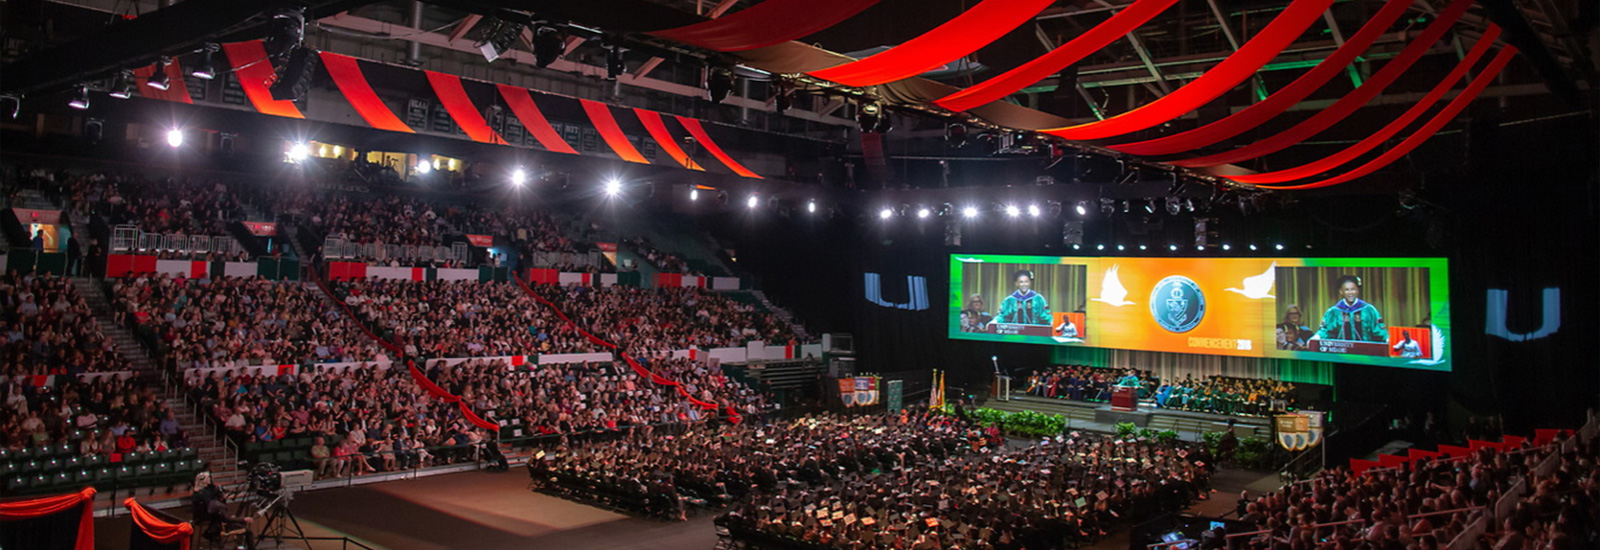 Fall 2018 commencement